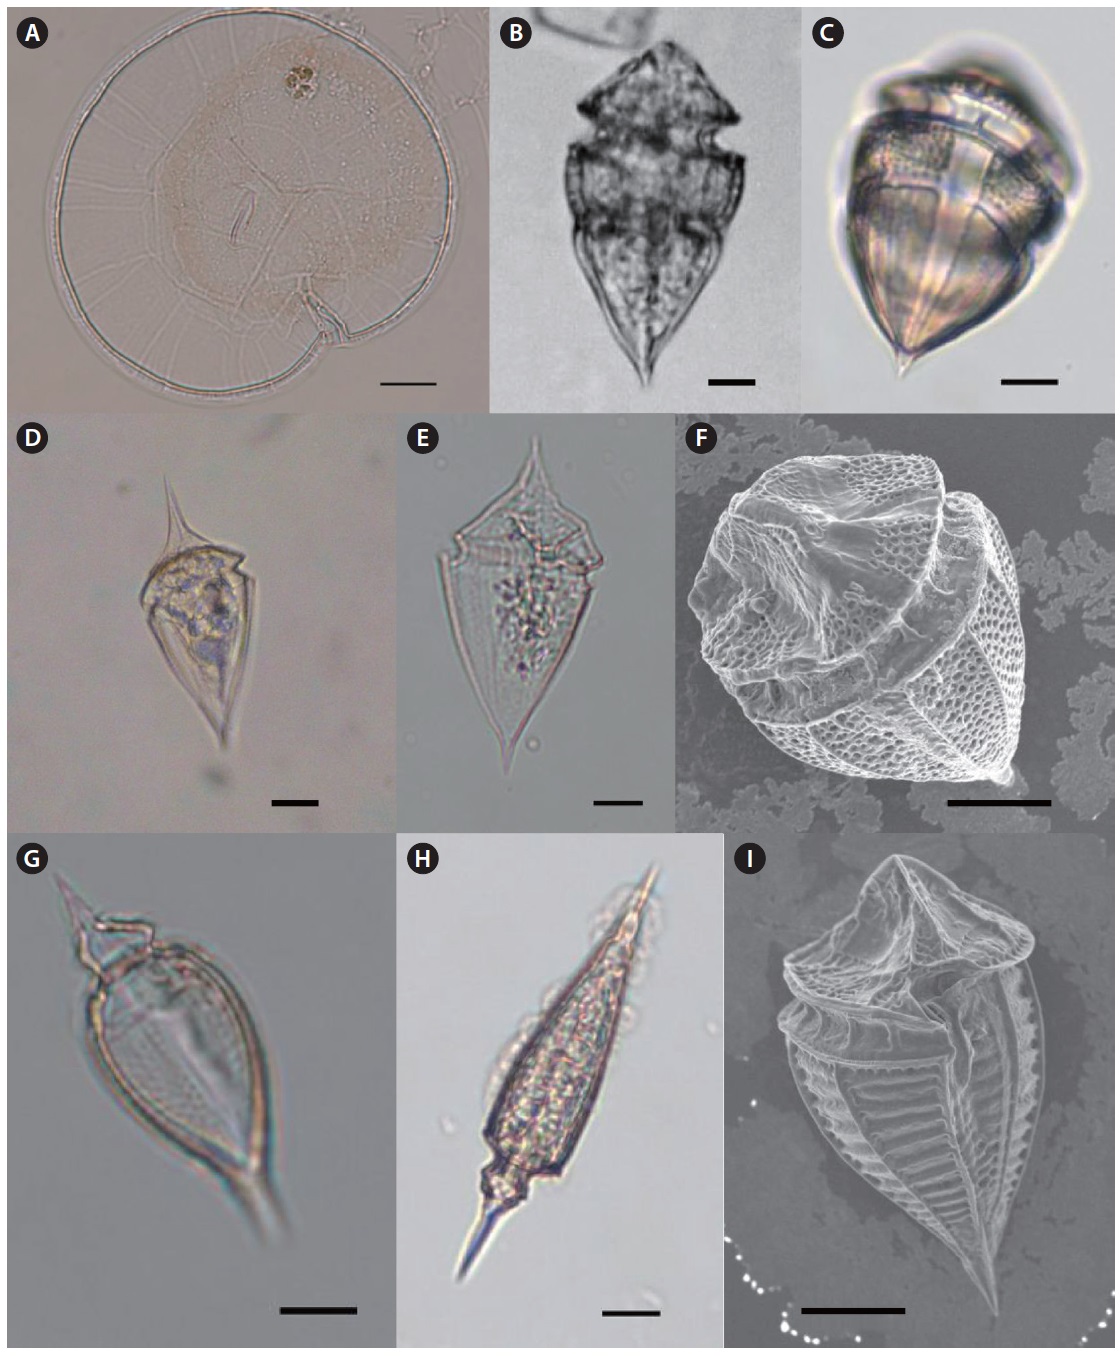 Light microscopy (LM) and scanning electron microscopy (SEM). (A) Pyrophacus steinii (LM), epitheca (B) Oxytoxum constrictum (SEM), lateral view,
(C) O. constrictum (LM), (D-E) Oxytoxum milneri (LM), lateral view, (F) Oxytoxum reticulatum (SEM), epitheca, (G) Oxytoxum sceptrum (LM), lateral view, (H)
Oxytoxum scolopax (LM), lateral view, (I) Oxytoxum tesselatum (SEM), ventral view. Scale bars, 10 μm
.